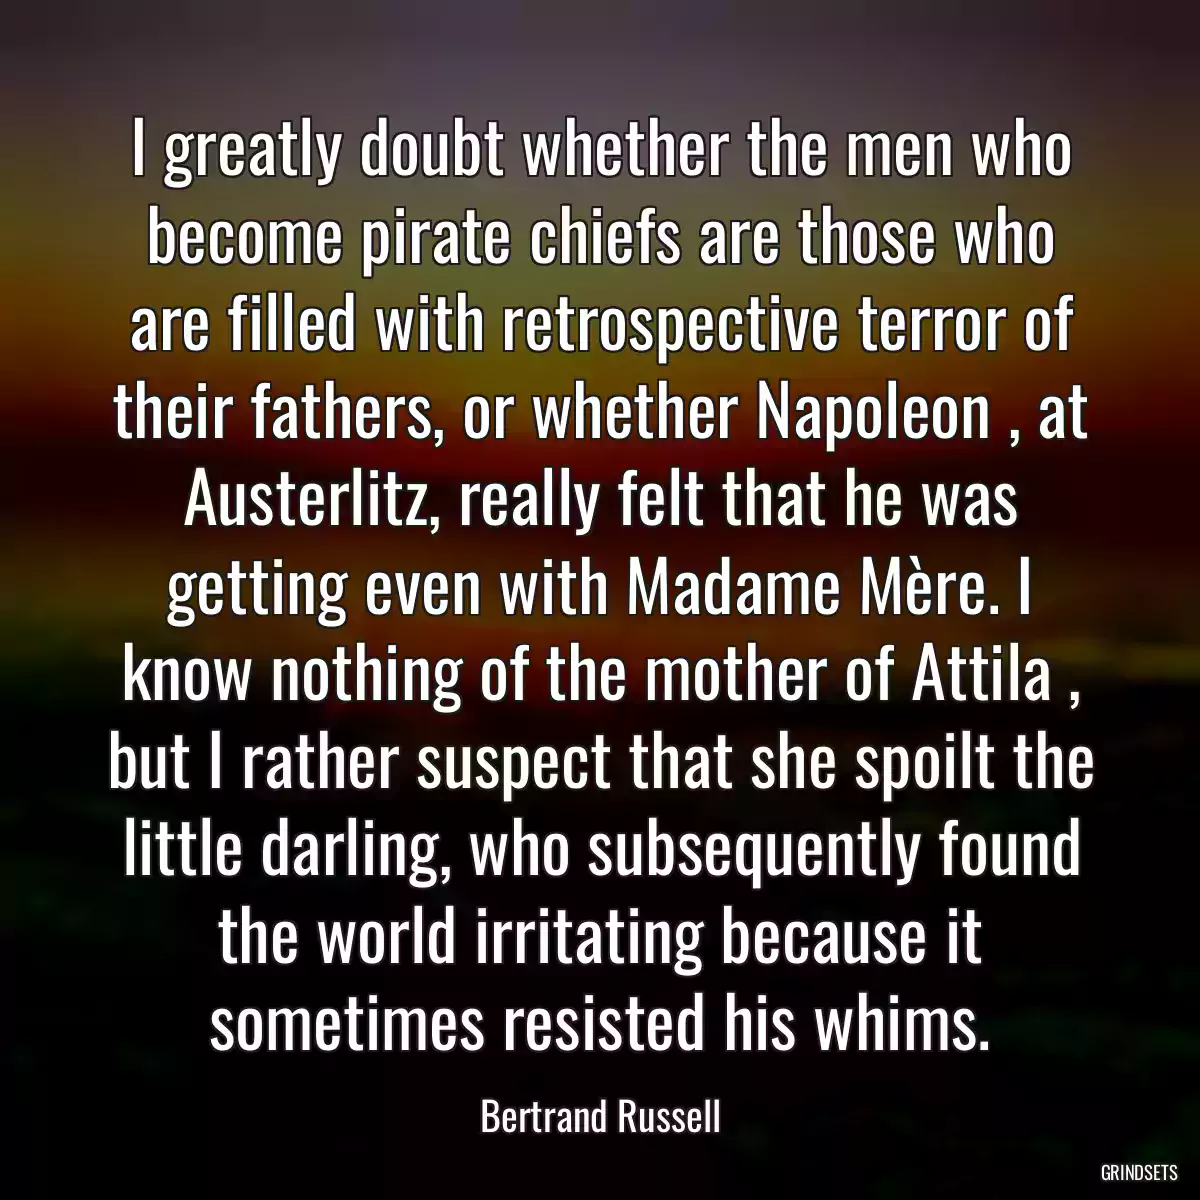 I greatly doubt whether the men who become pirate chiefs are those who are filled with retrospective terror of their fathers, or whether Napoleon , at Austerlitz, really felt that he was getting even with Madame Mère. I know nothing of the mother of Attila , but I rather suspect that she spoilt the little darling, who subsequently found the world irritating because it sometimes resisted his whims.